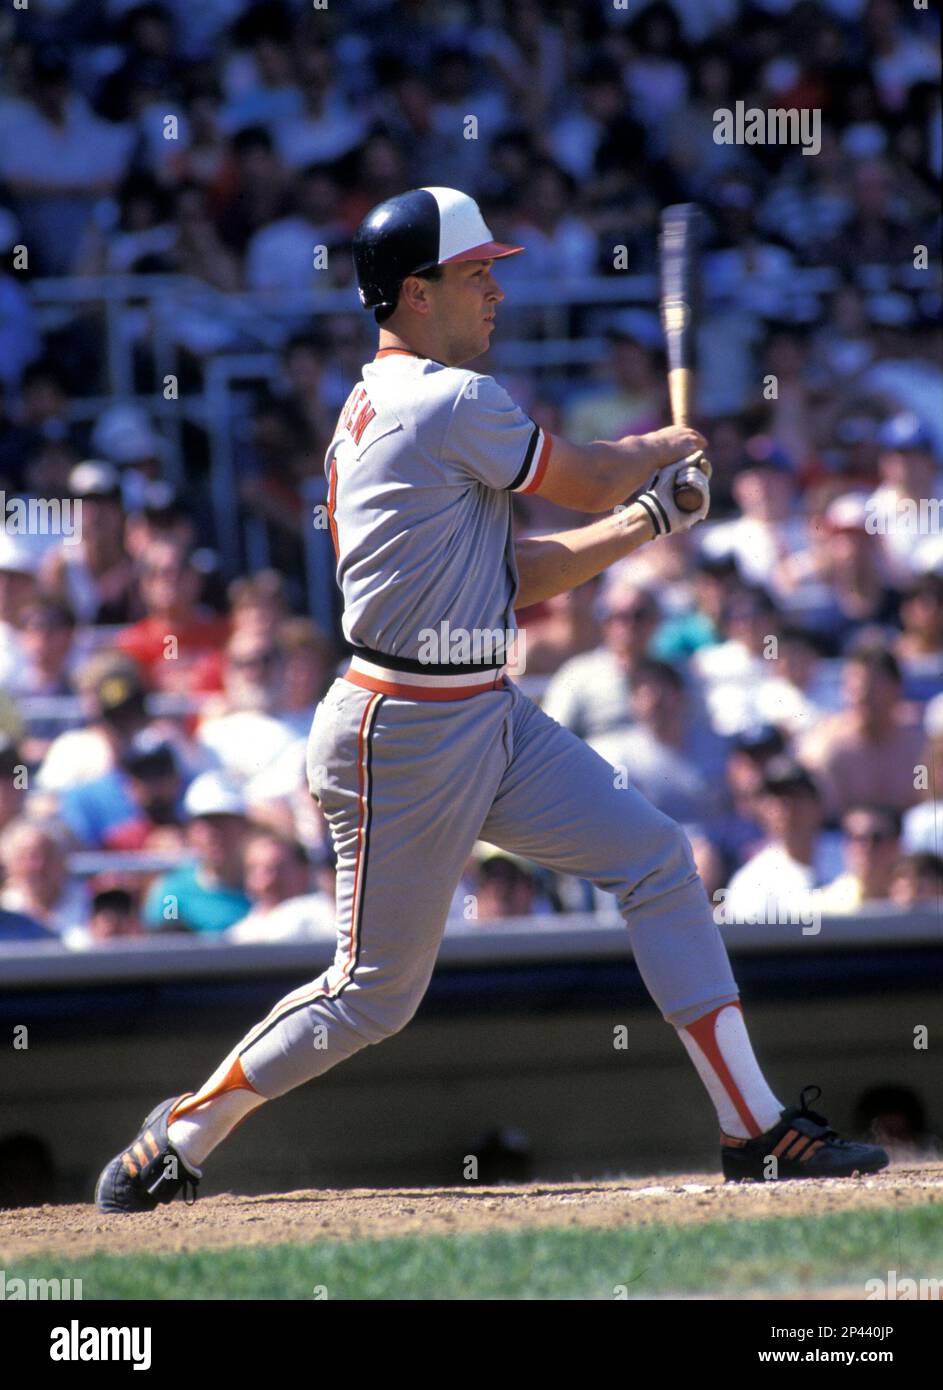 Baltimore Orioles Cal Ripken Jr.( 8) during a game from his career at  Yankee Stadium in the Bronx New York. Cal Ripken Jr. played for 21 years  all with the Orioles, was